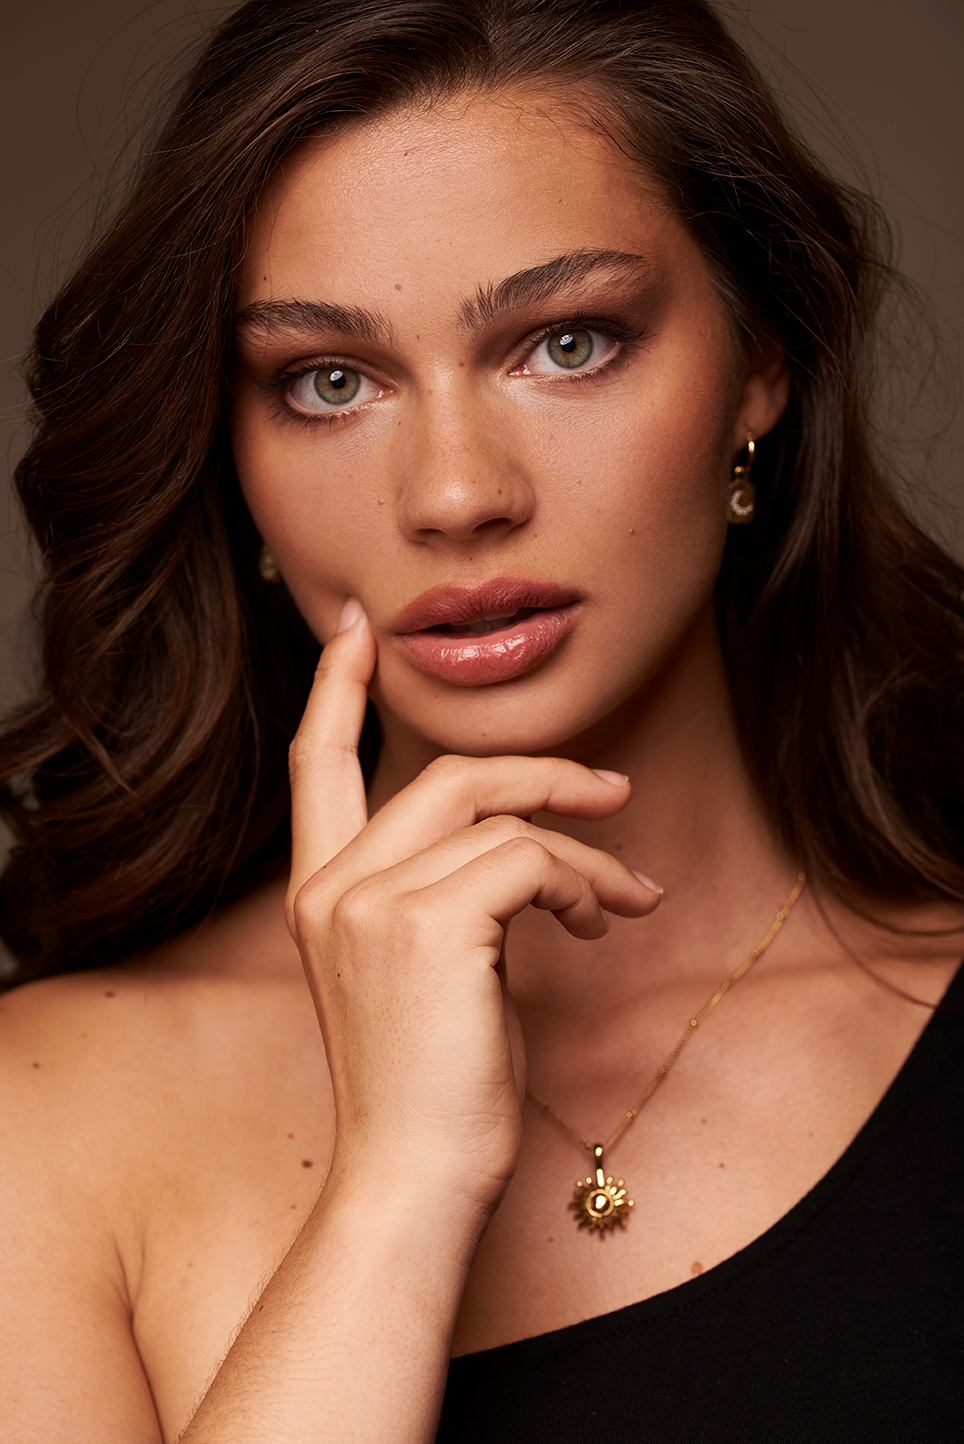 Dark haired model showing a necklace